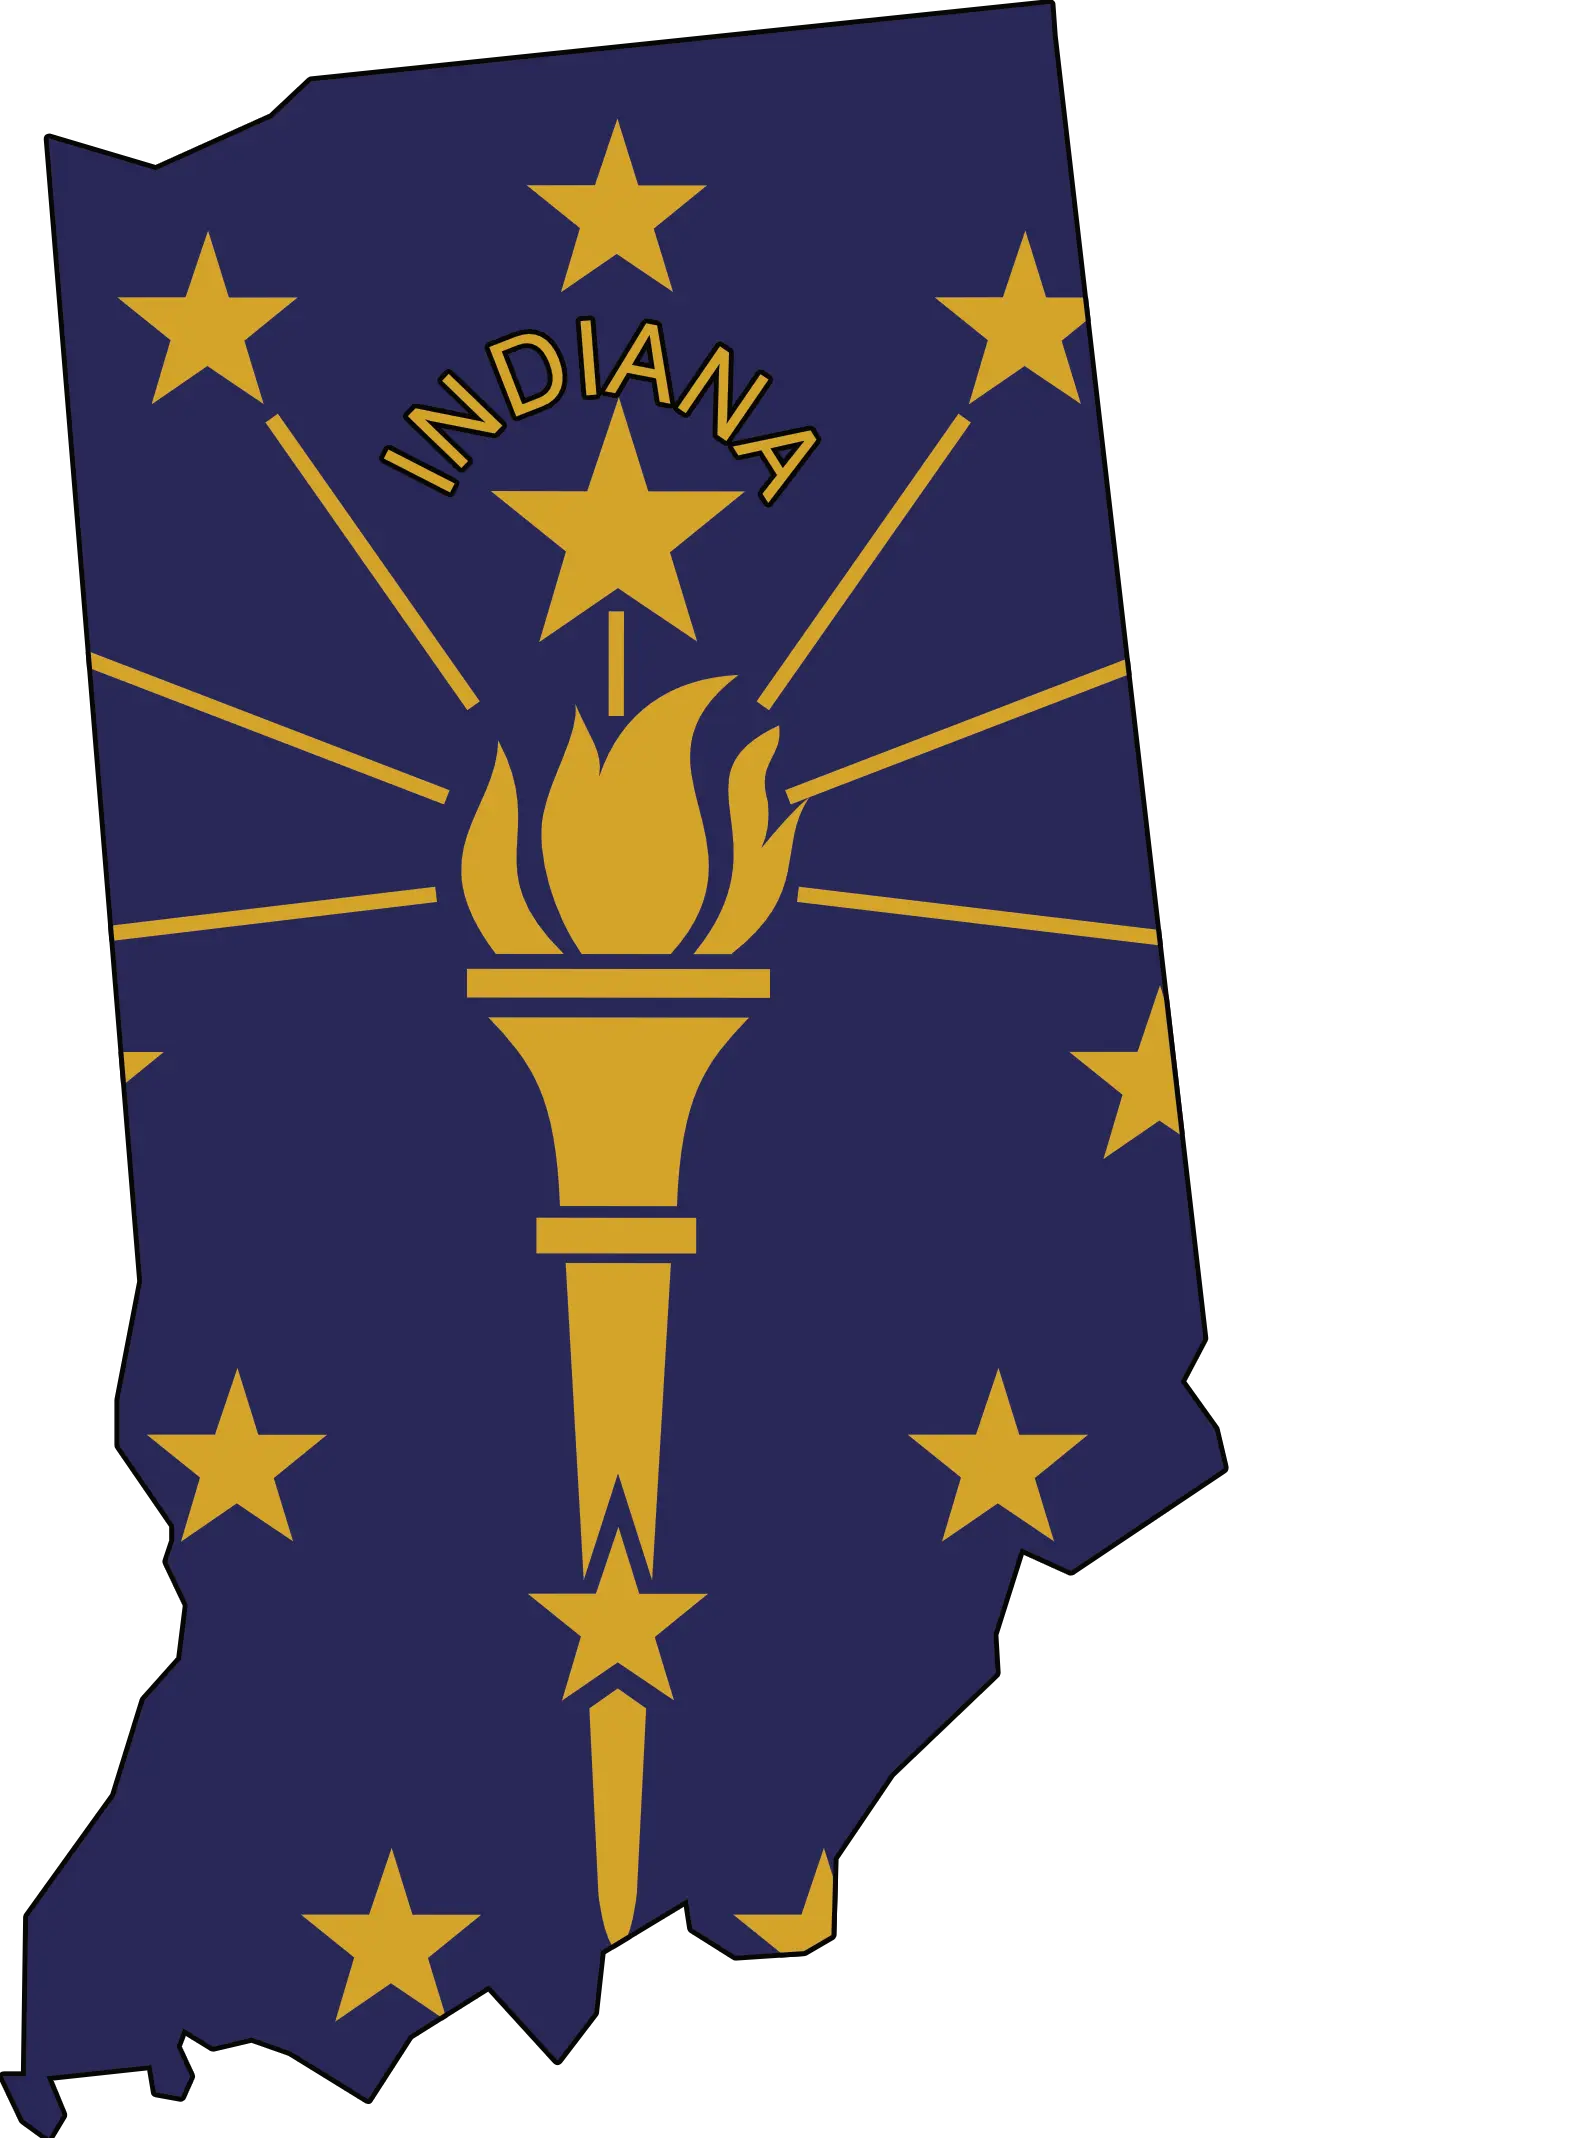 Outline of Indiana with the state flag.